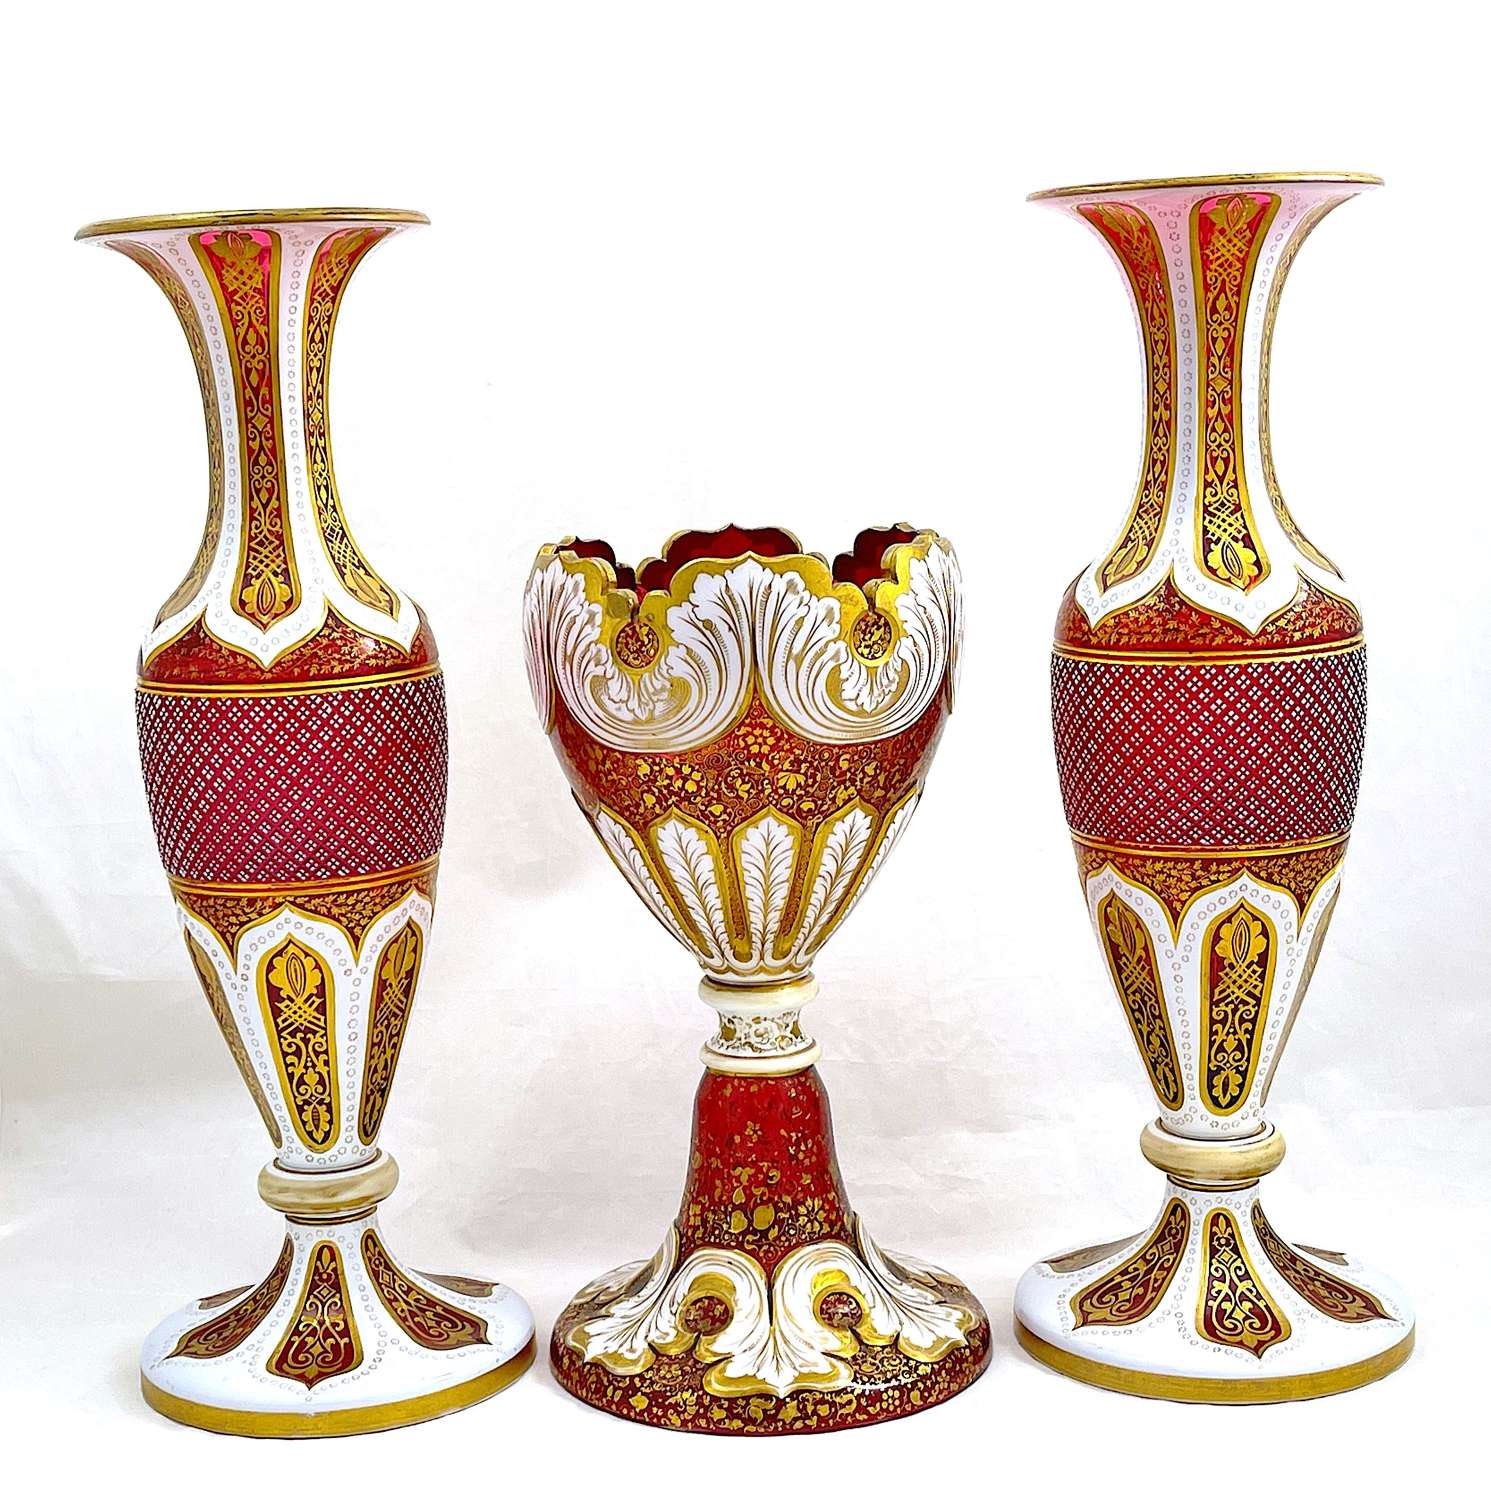 Outstanding Large Antique Three Piece Bohemian Overlay Glass Garniture